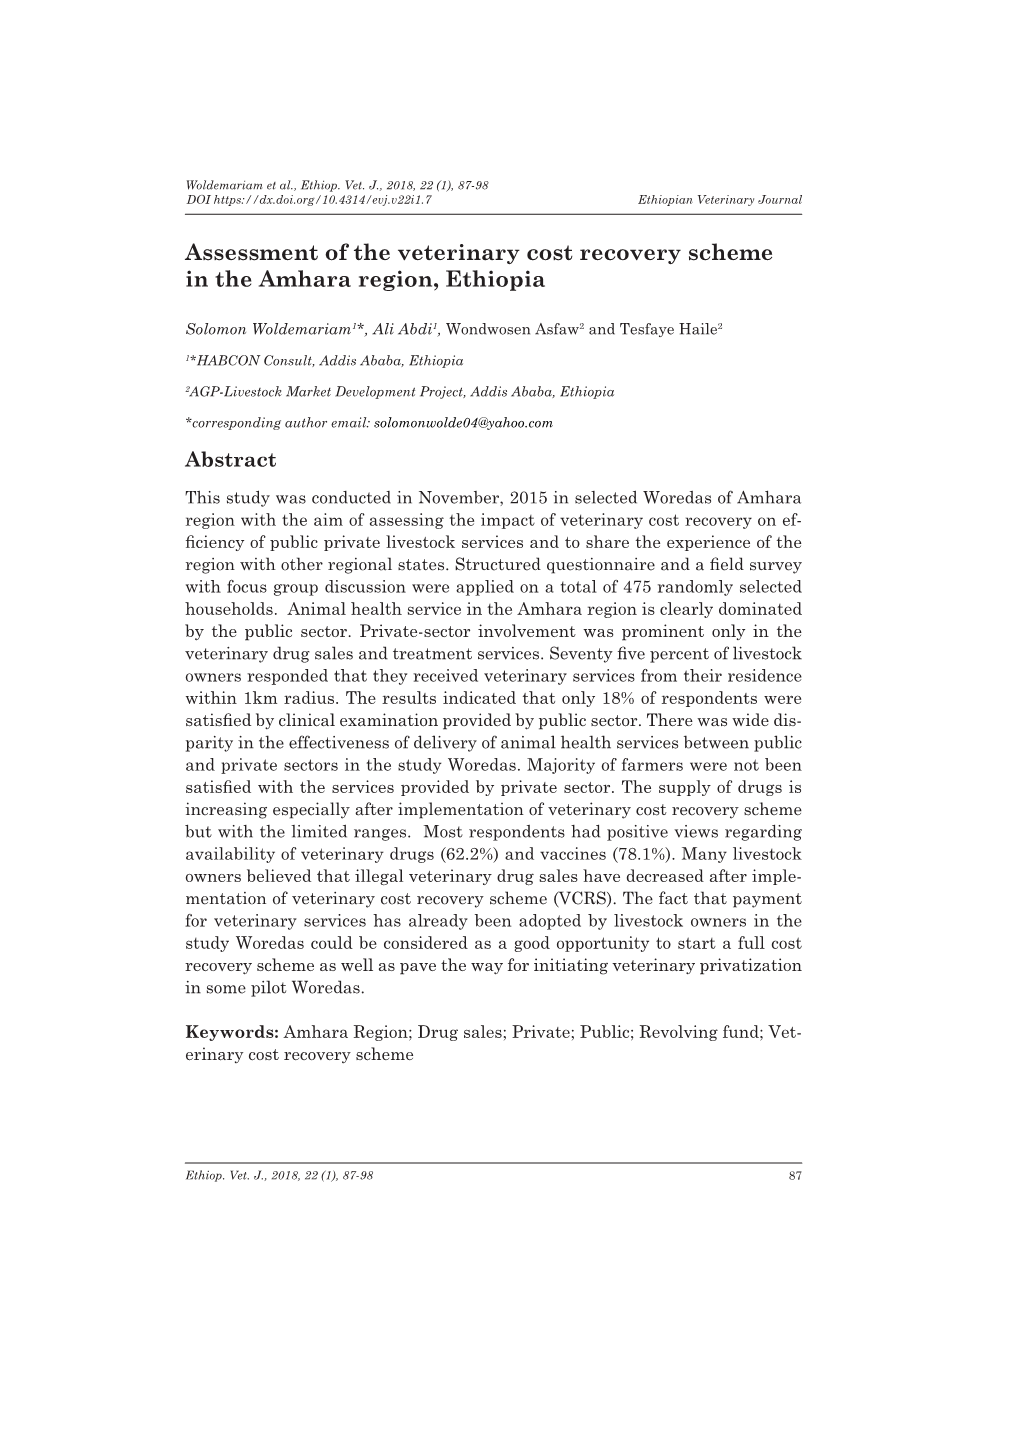 Assessment of the Veterinary Cost Recovery Scheme in the Amhara Region, Ethiopia